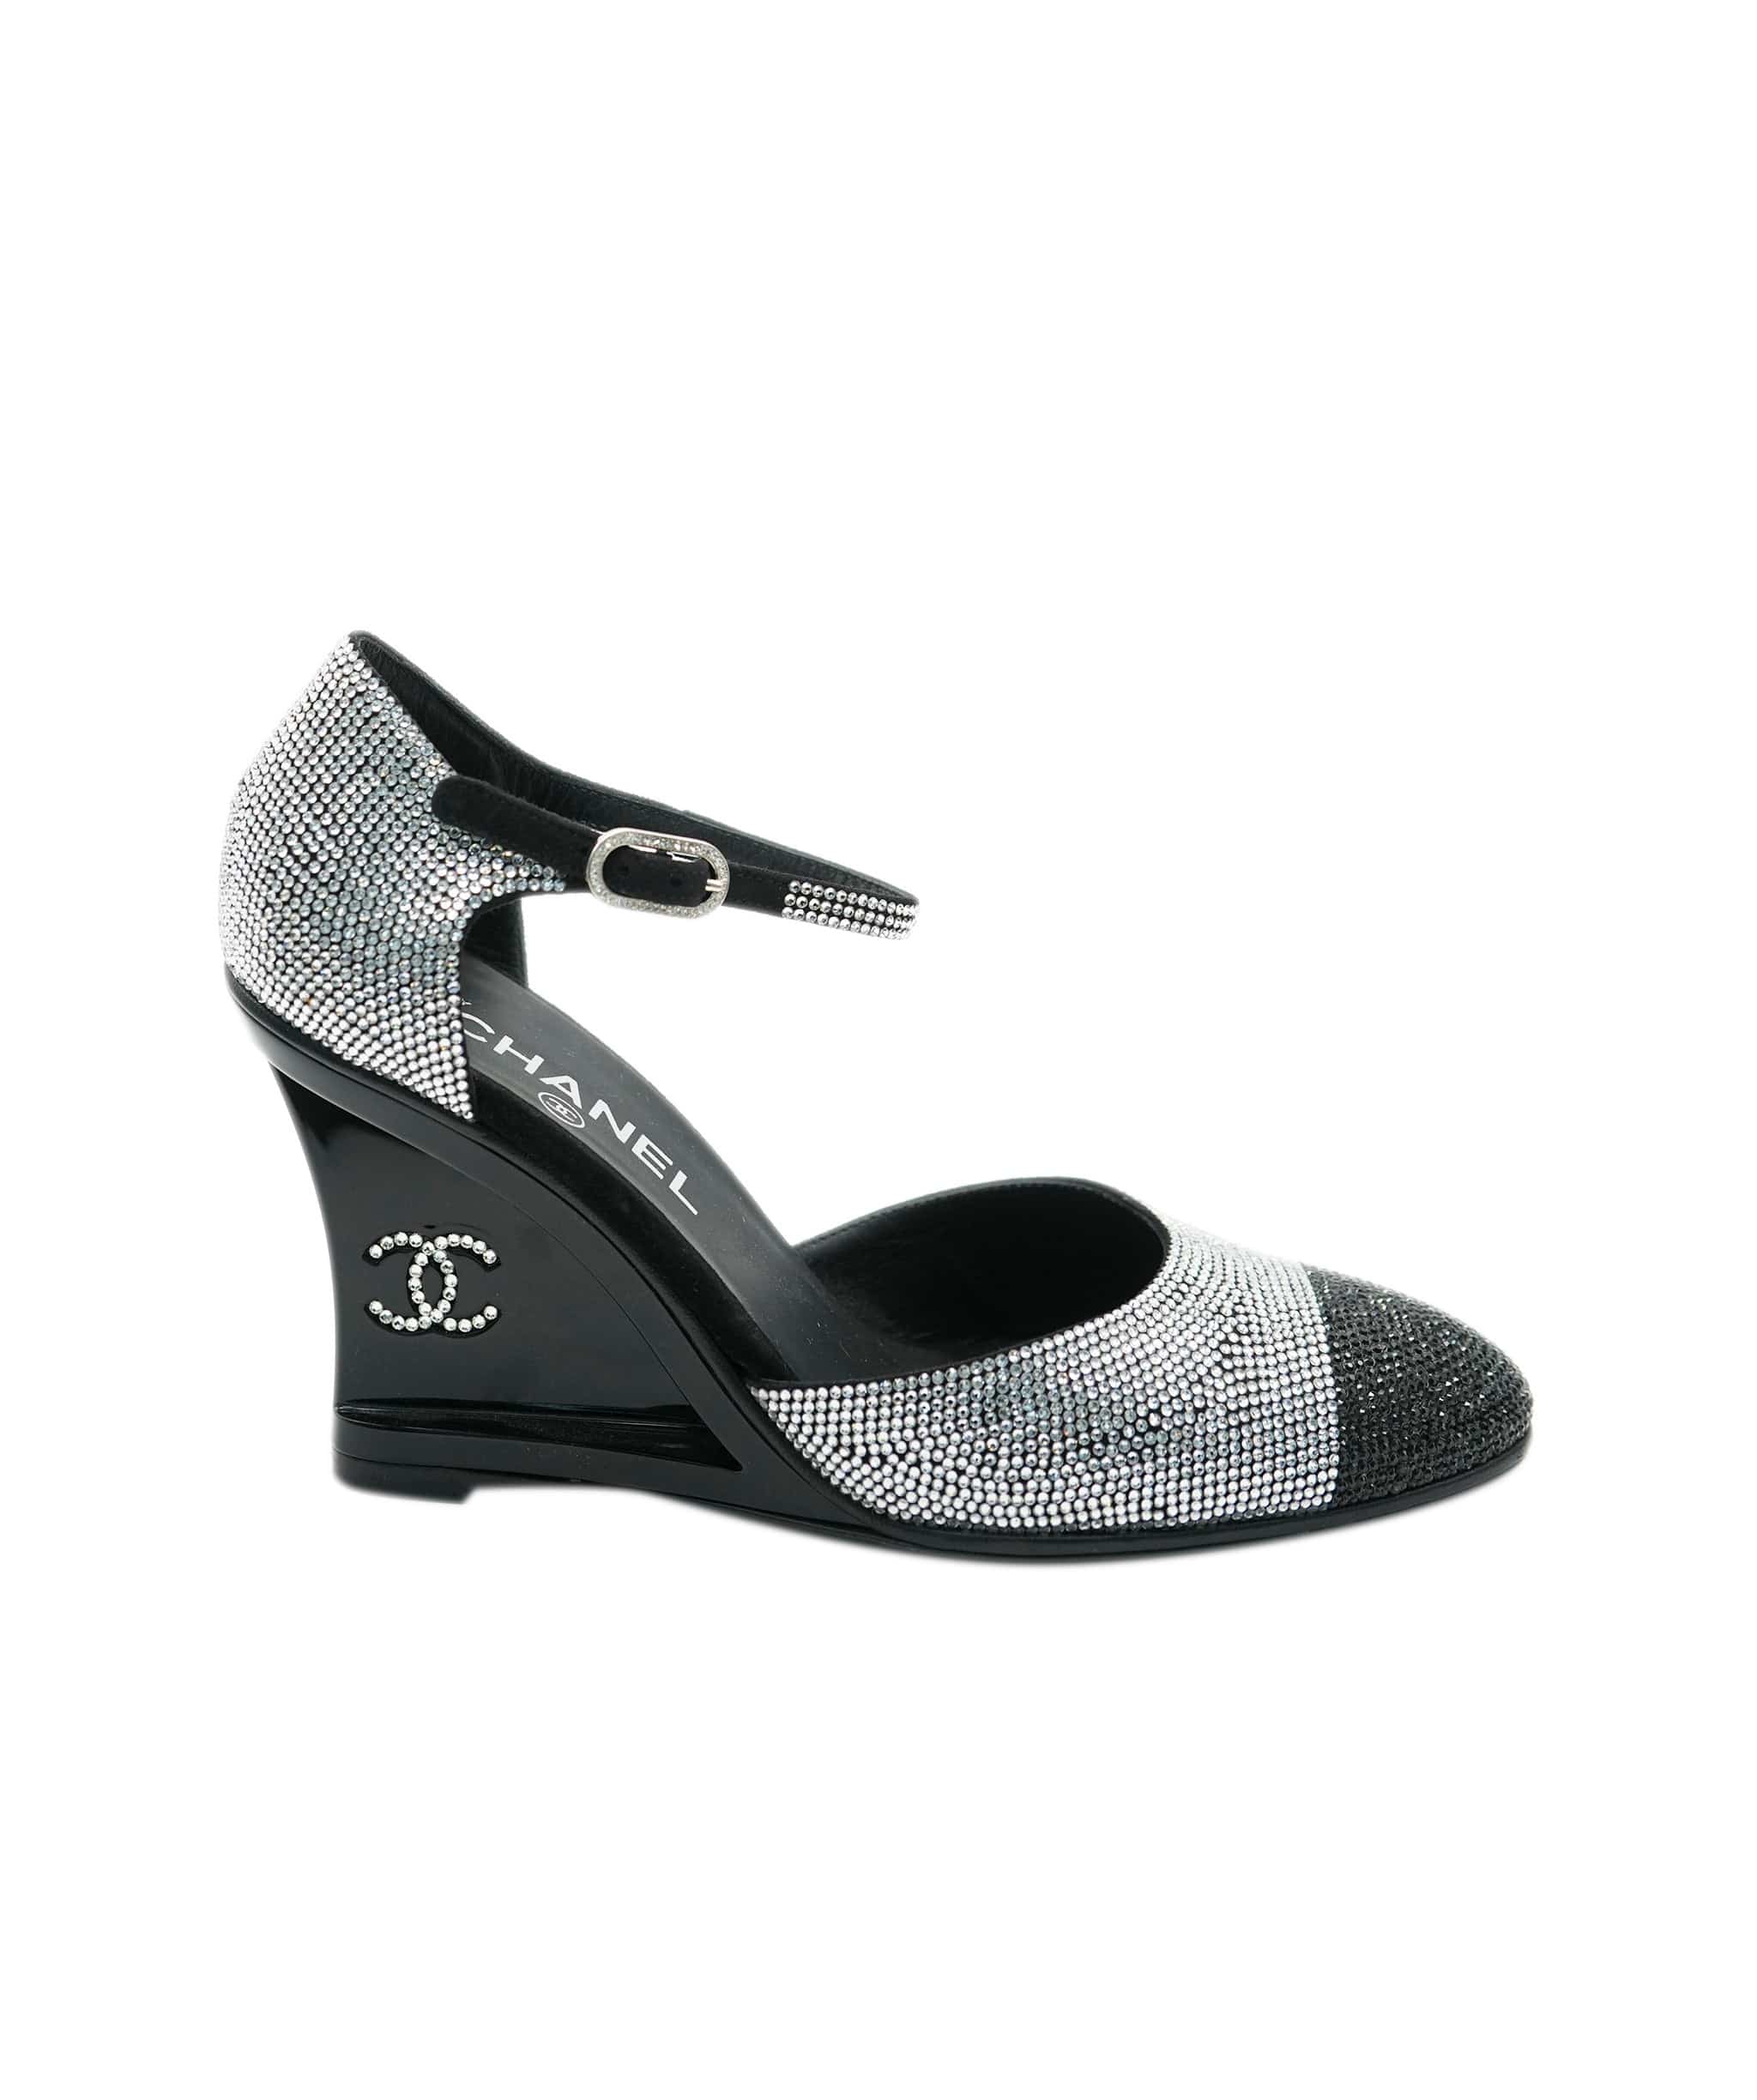 Chanel Chanel wedges crystals 38 AVC1979